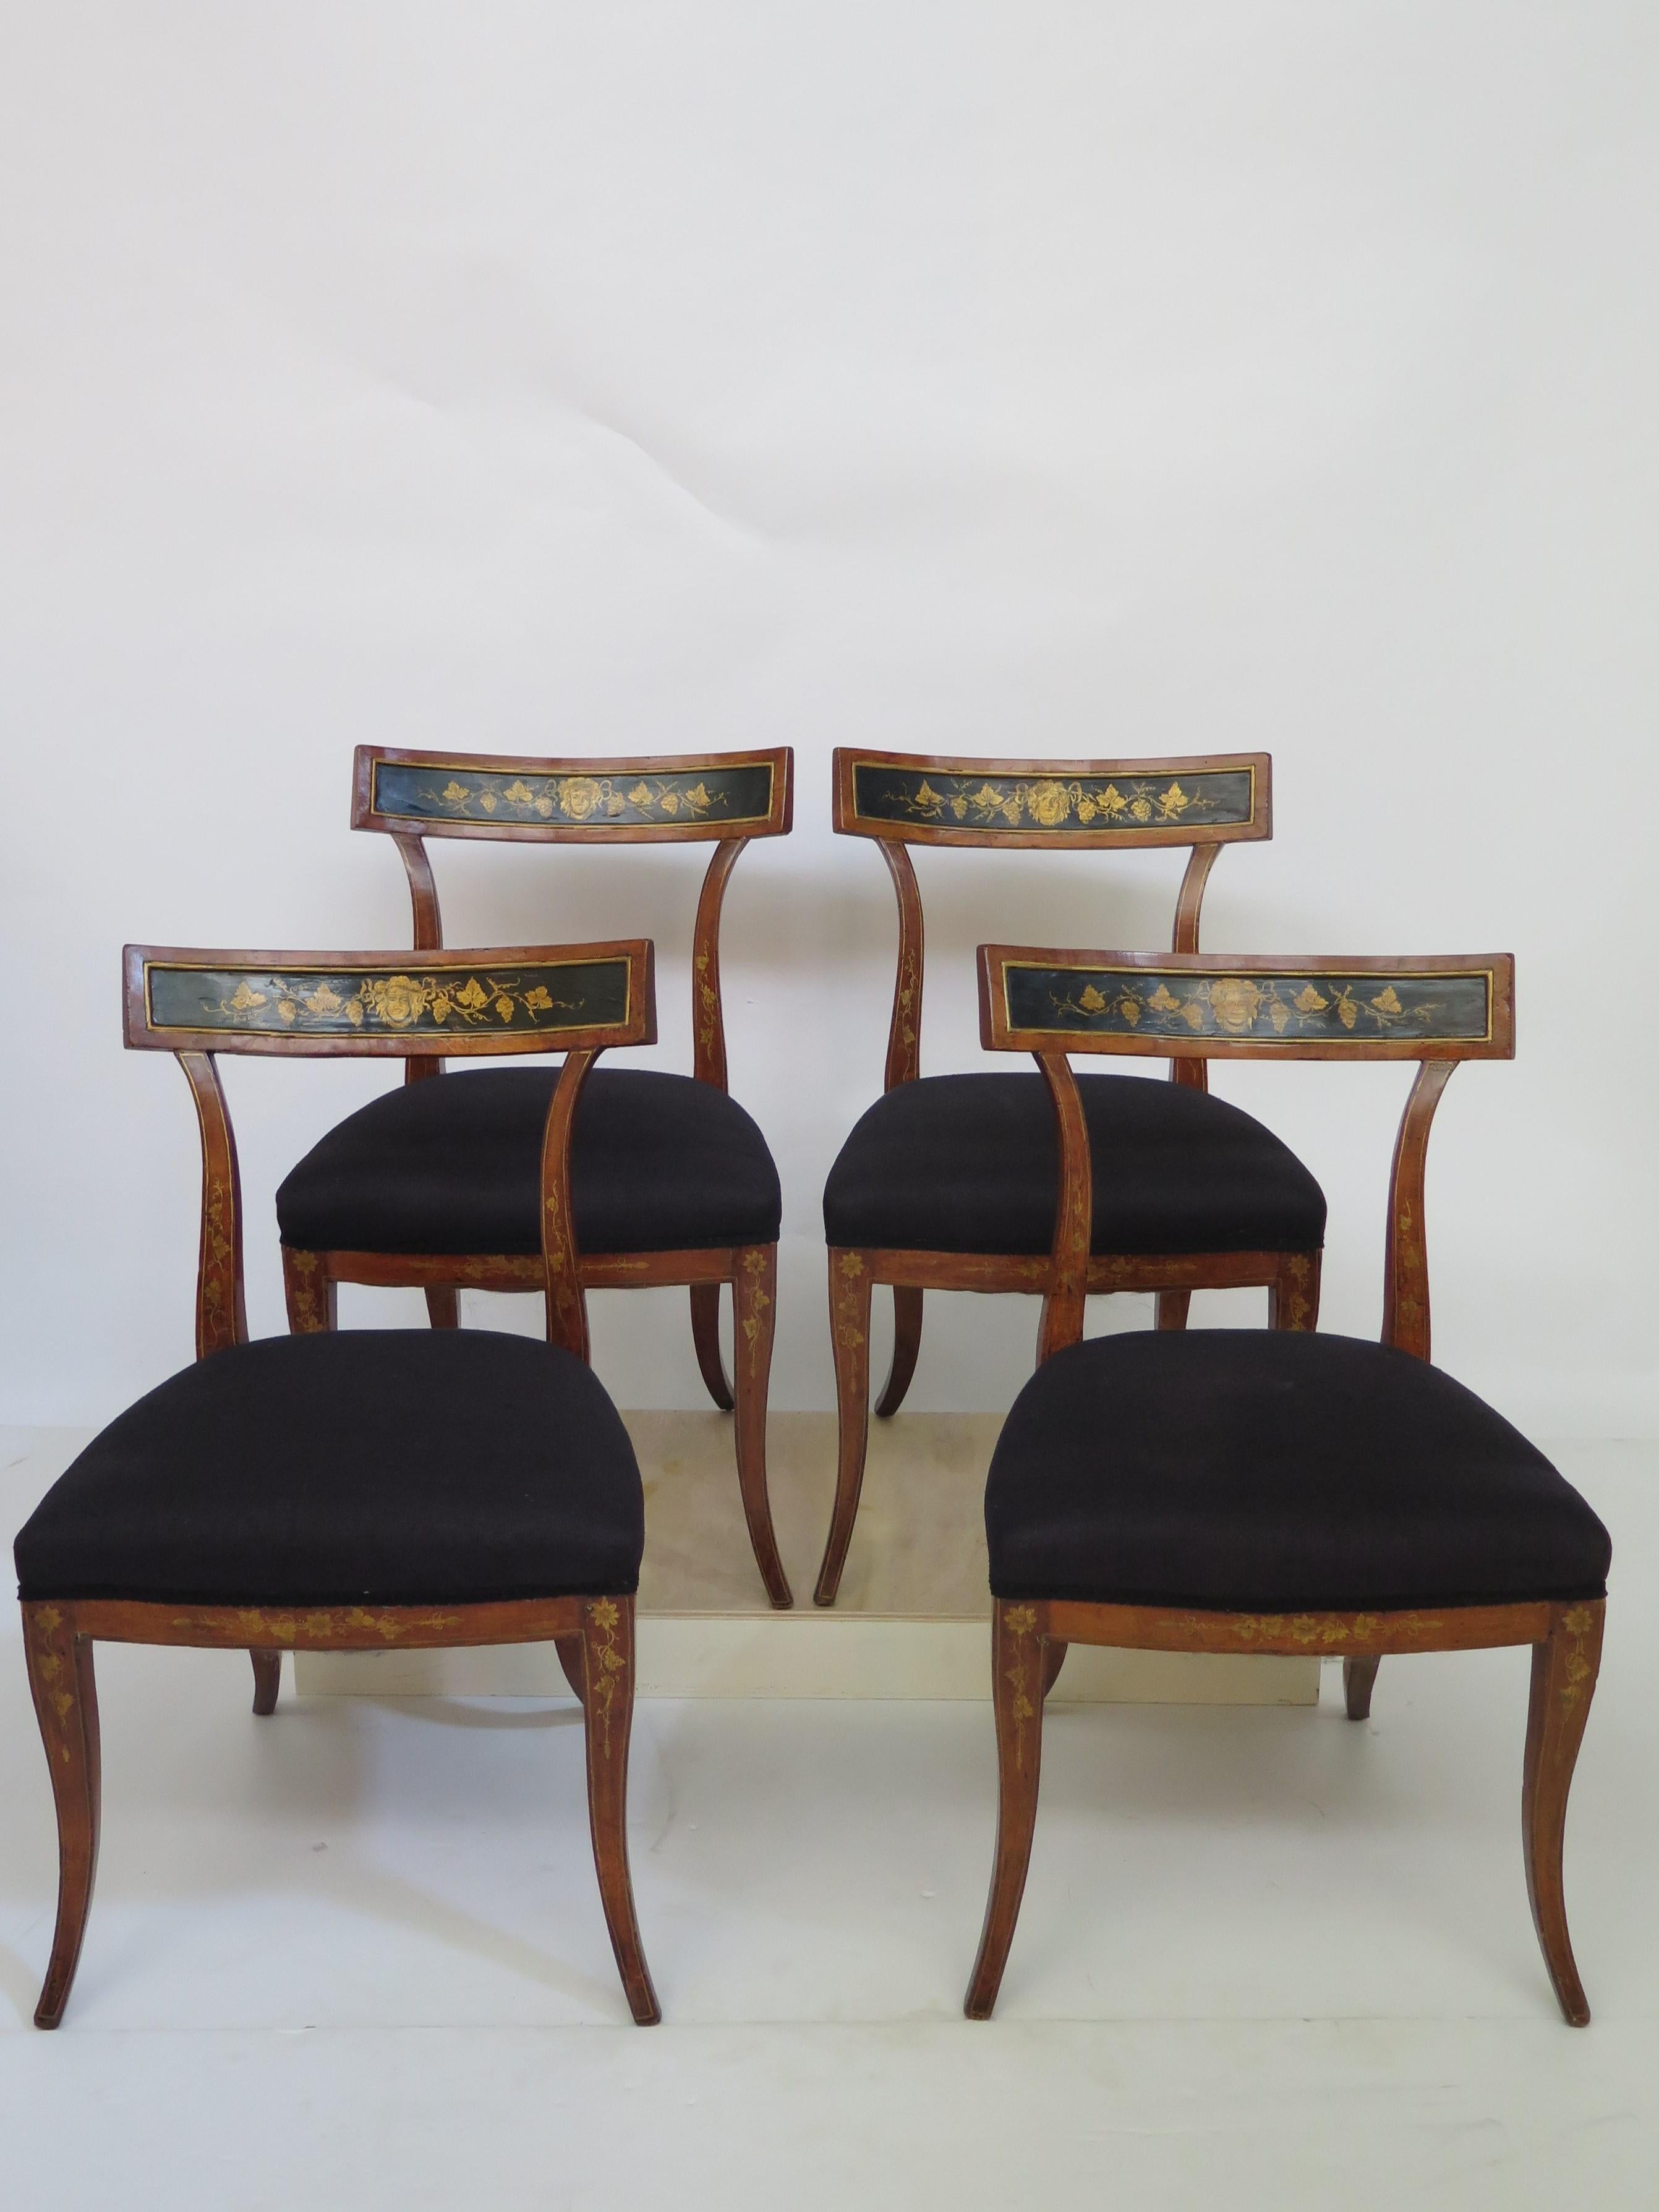 A set of four English Regency period sabre leg dining chairs. 
With classic Regency styling this fruitwood set offers black upholstered seats.
The centre back rail is well formed and has painted in the chinoiserie style, black and gold picture